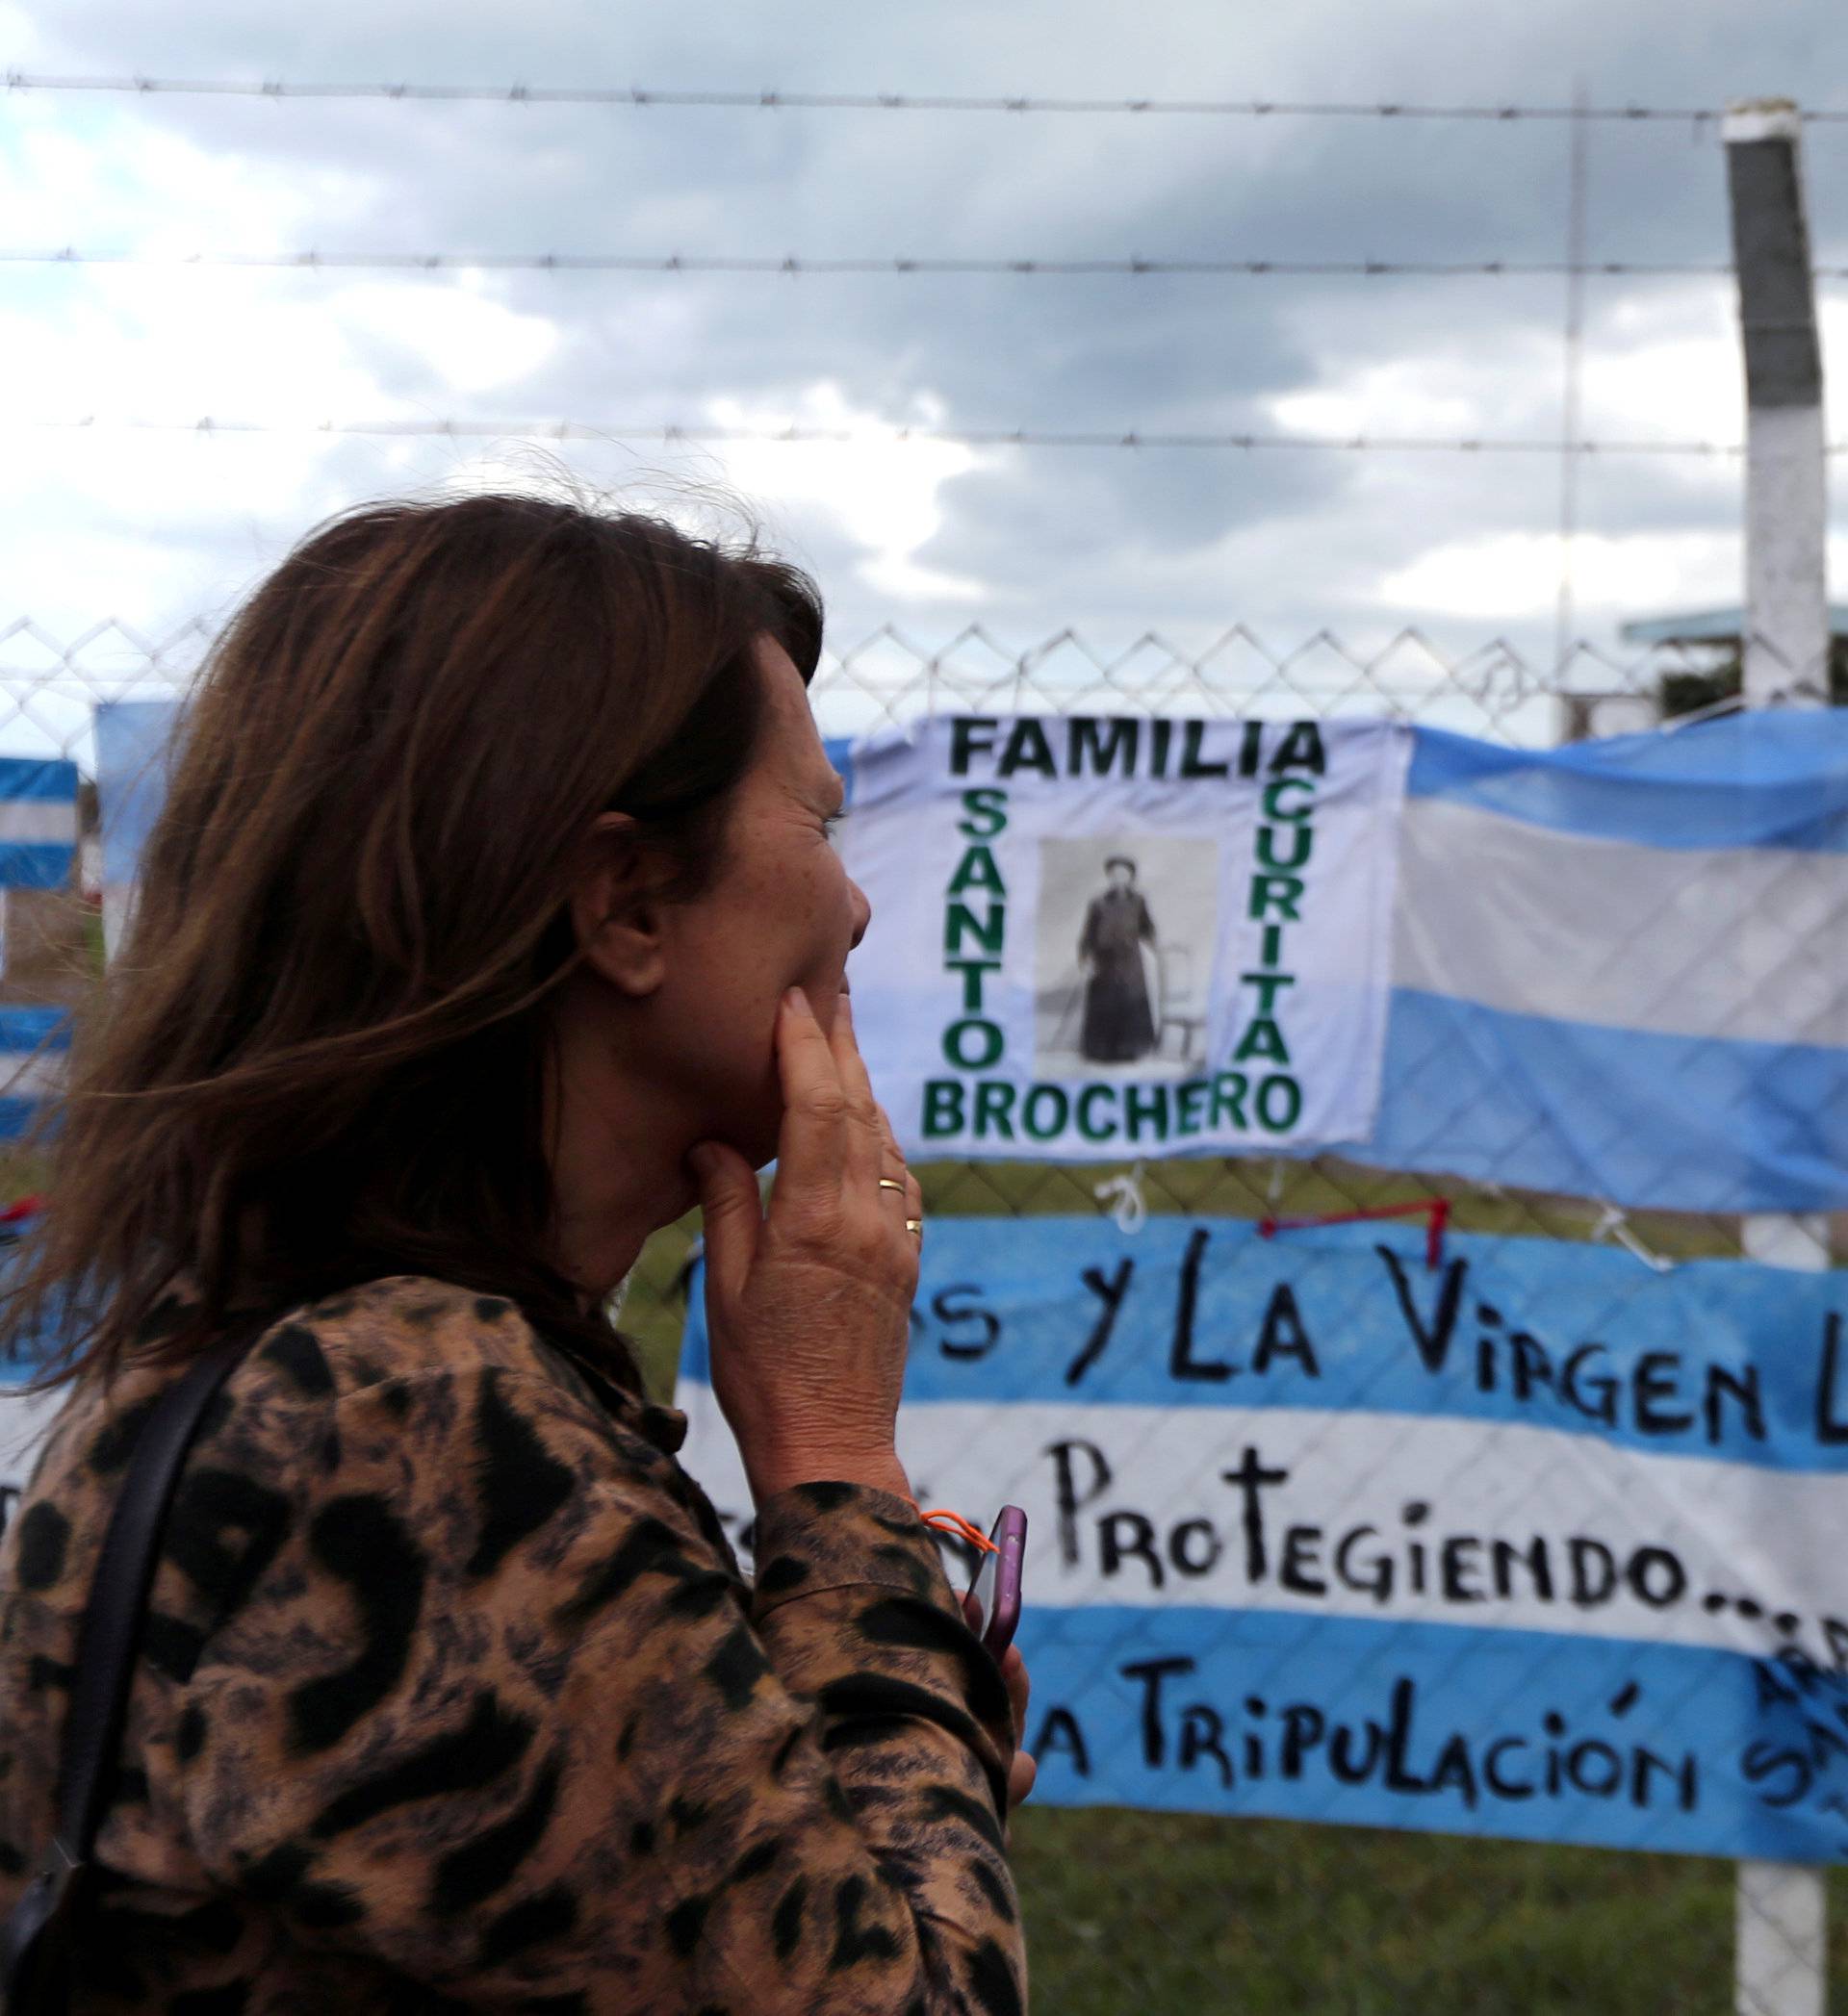 A woman looks at signs in support of the missing crew members of the ARA San Juan submarine in Mar del Plata